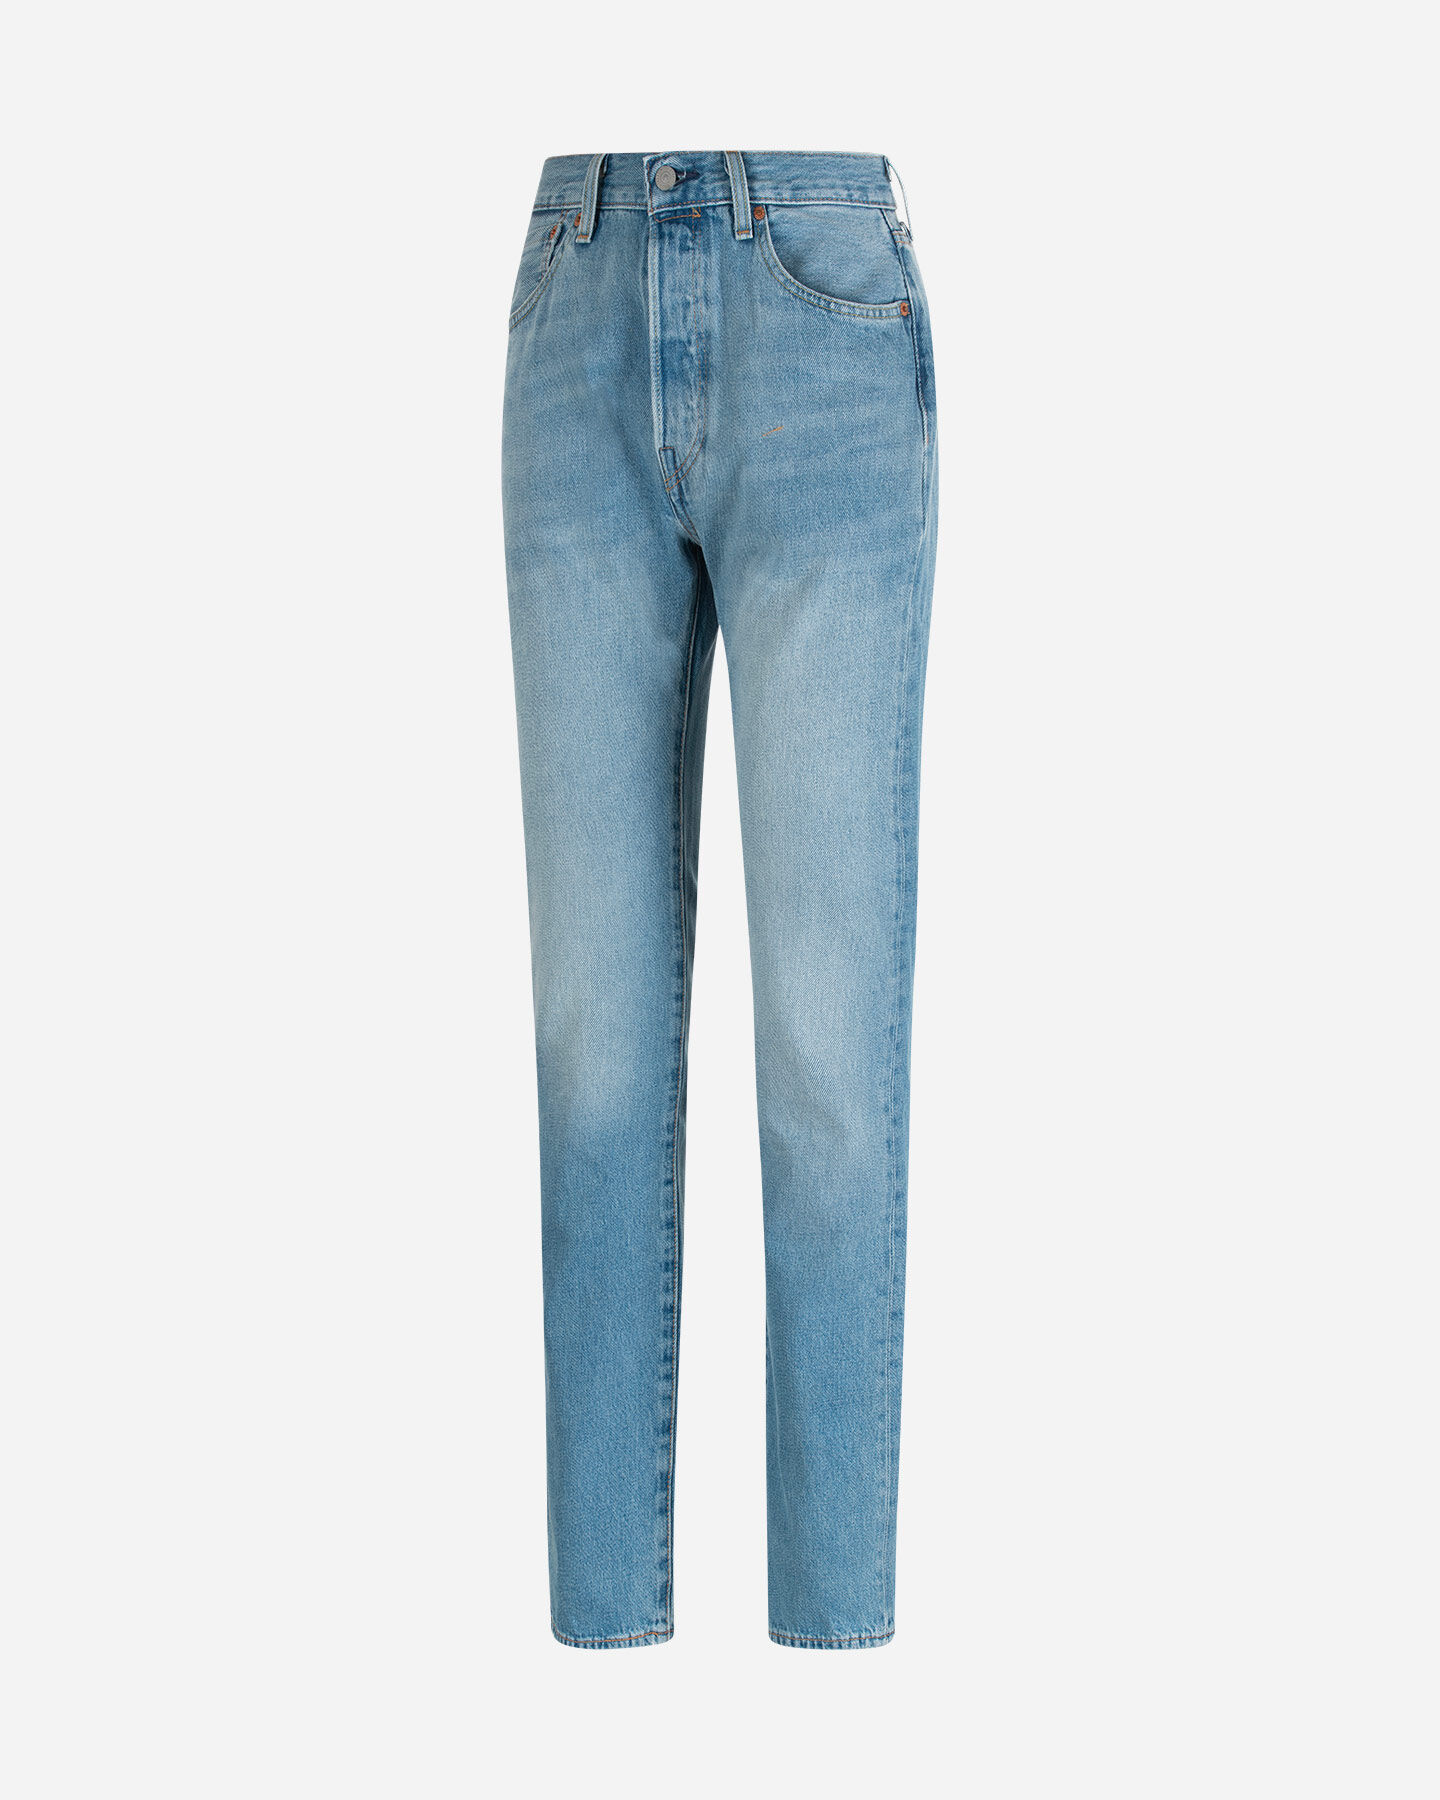  Jeans LEVI'S 501 REGULAR M S4122296|3261|36 scatto 0